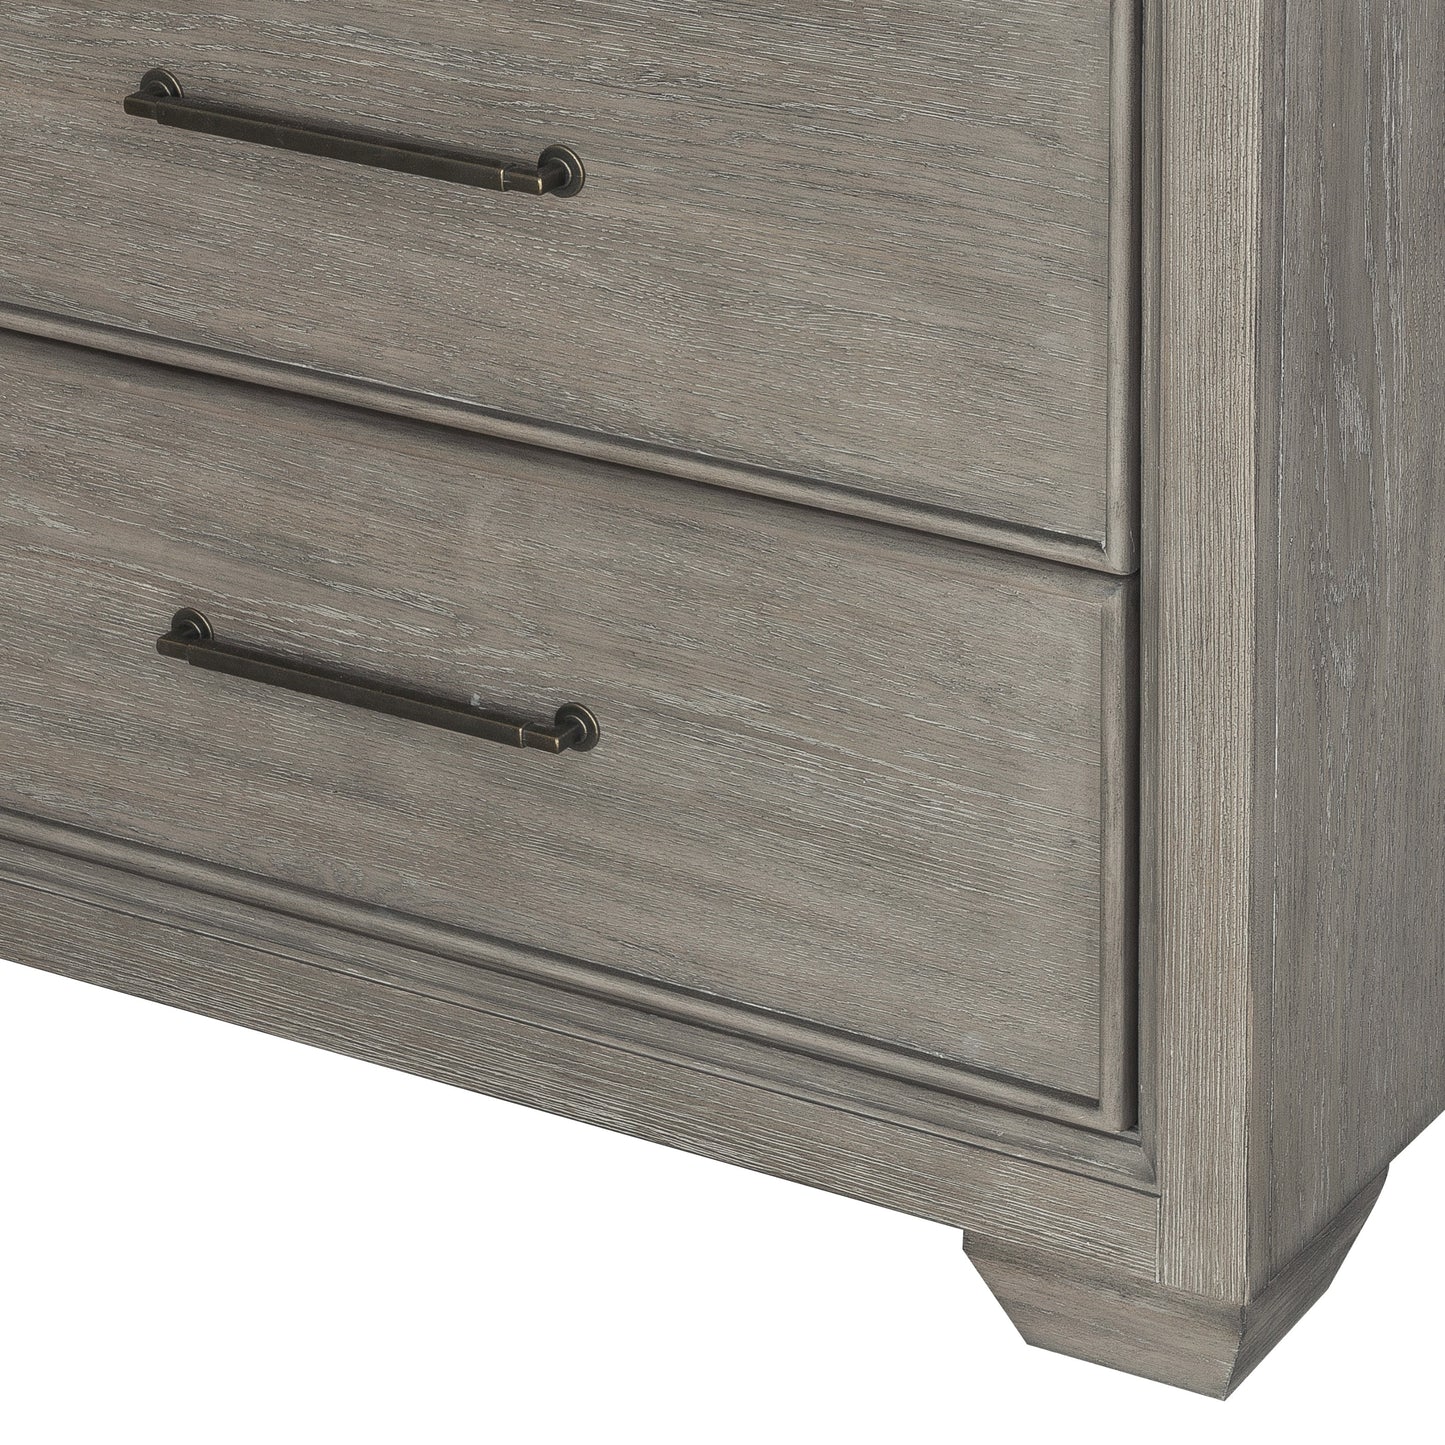 Ennesley Wood 2 Drawers Nightstand with USB Charger, Gray